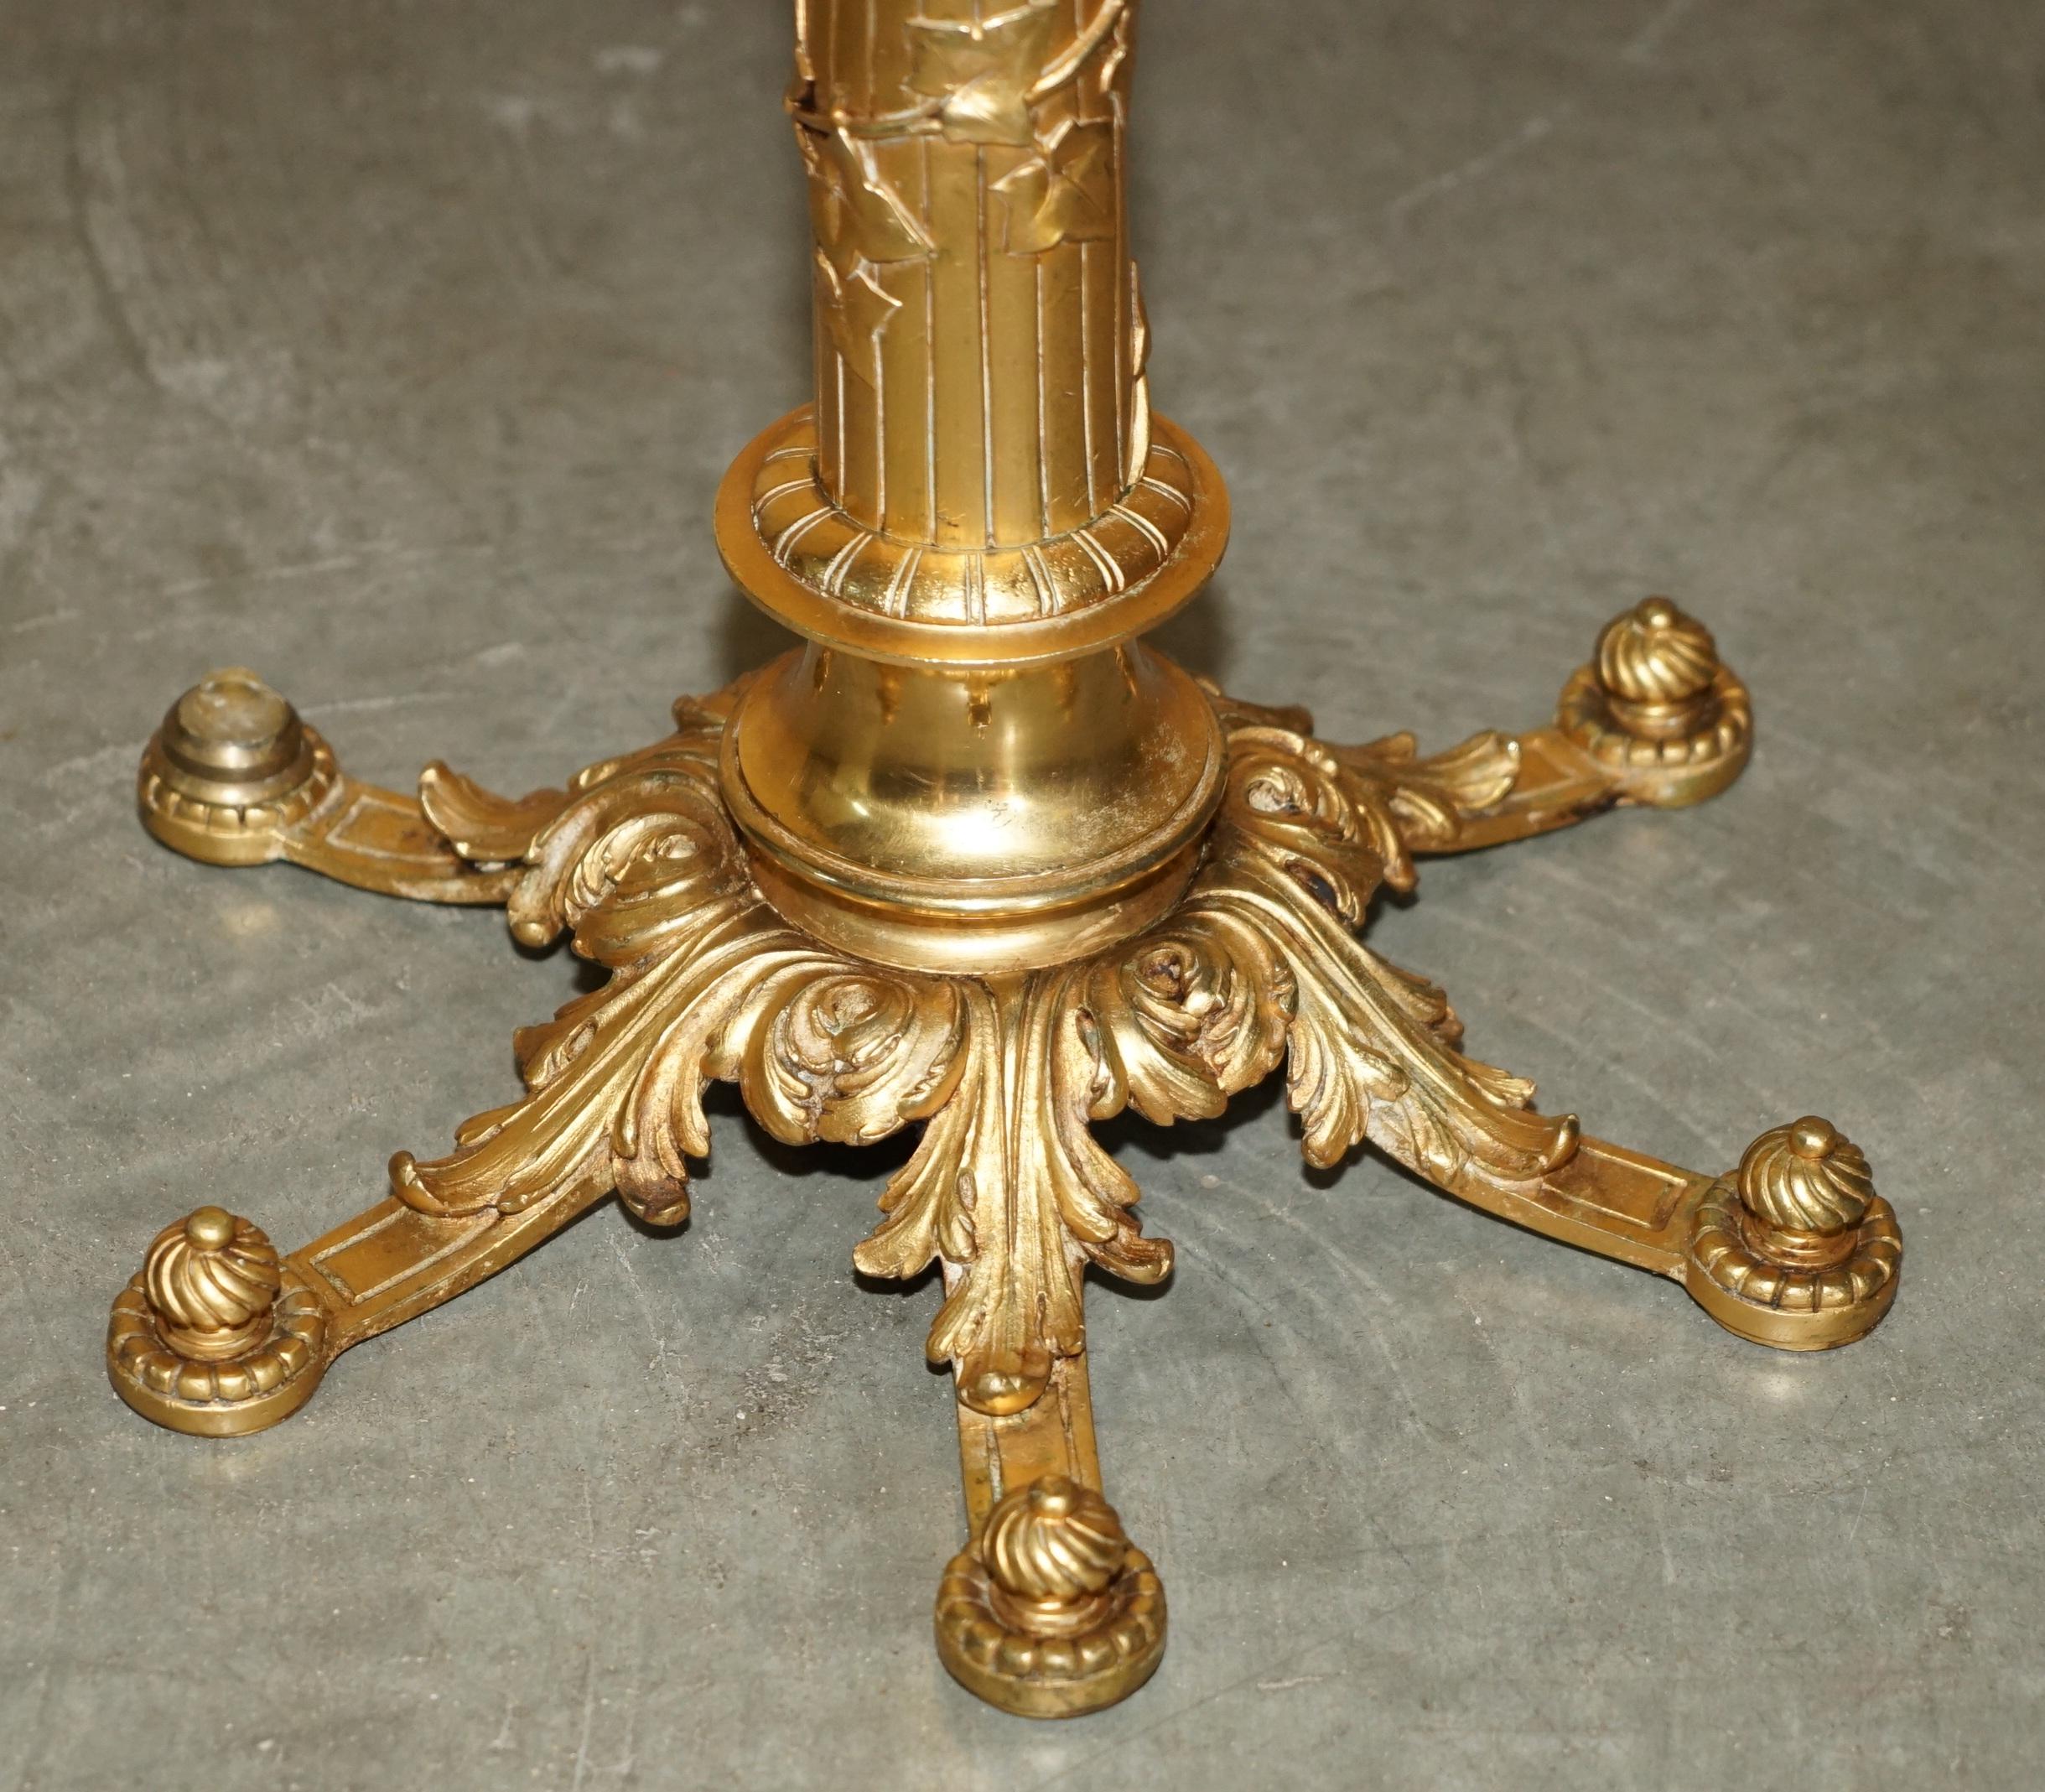 EXQUISITE ANTIQUE CIRCA 1900 BRASS SiDE END LAMP TABLE WITH THICK MARBLE TOP For Sale 3